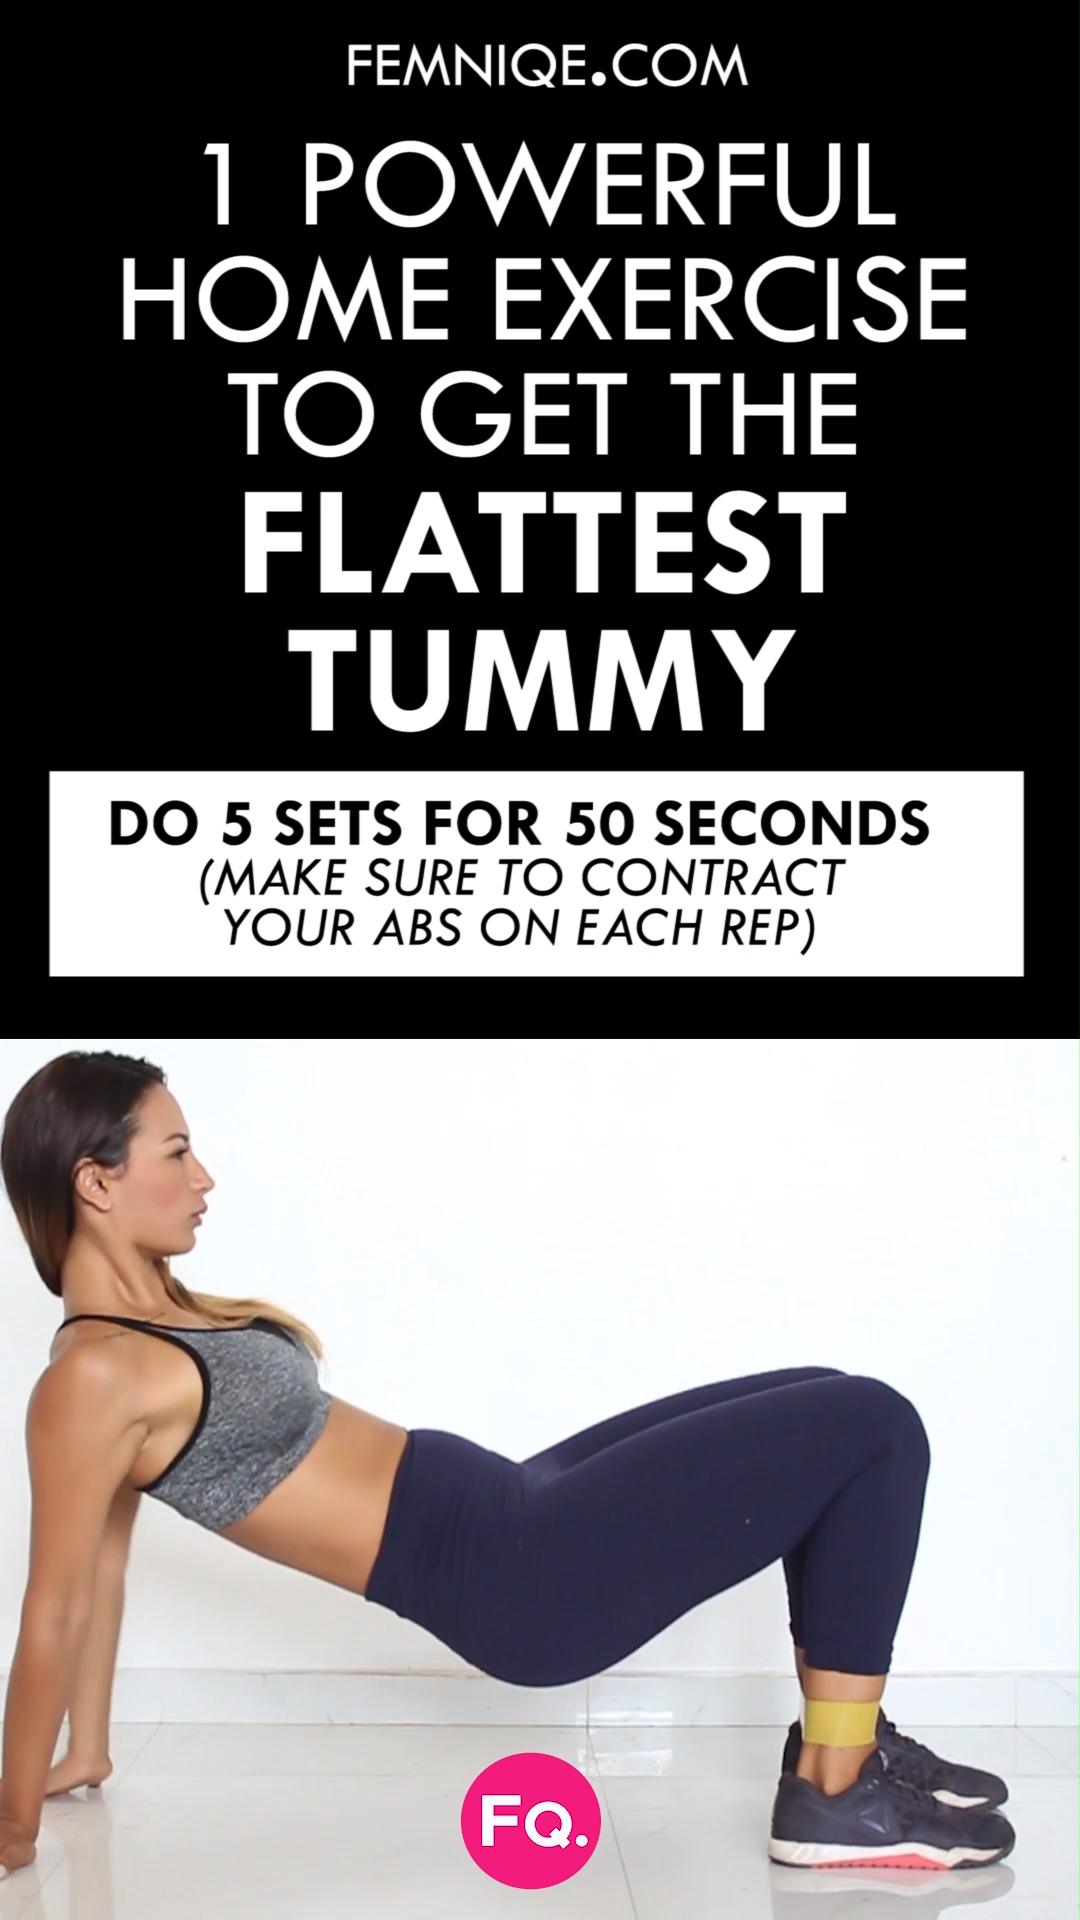 3 Flat Tummy Exercises That Work (Drop 2-4 Inches Off Your Waistline!) -   14 fitness Diet workouts ideas